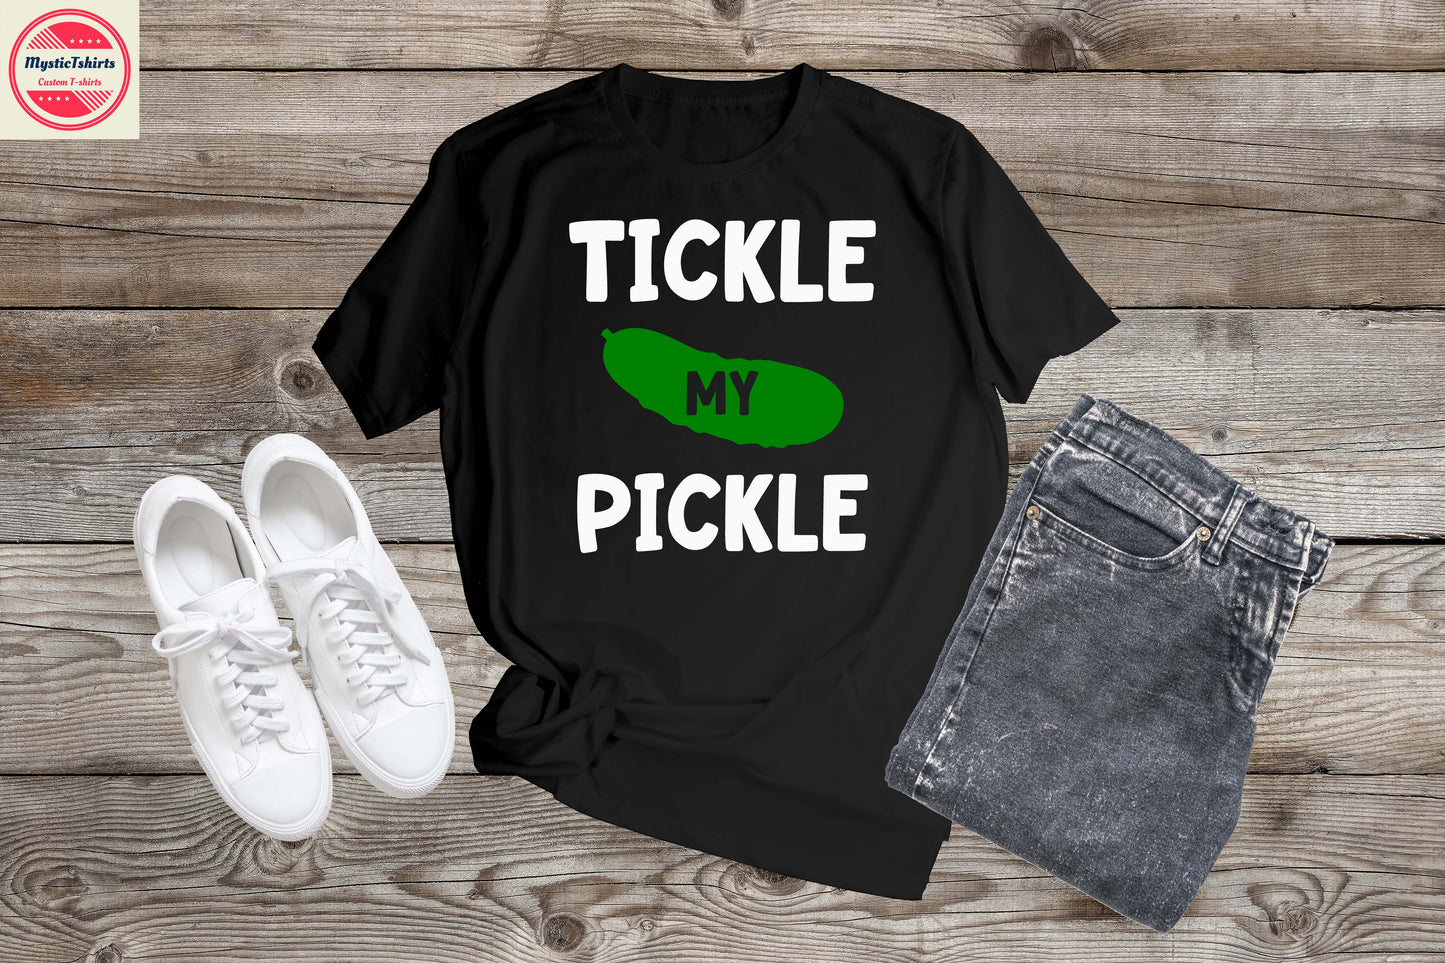 460. TICKLE MY PICKLE, Personalized T-Shirt, Custom Text, Make Your Own Shirt, Custom Tee